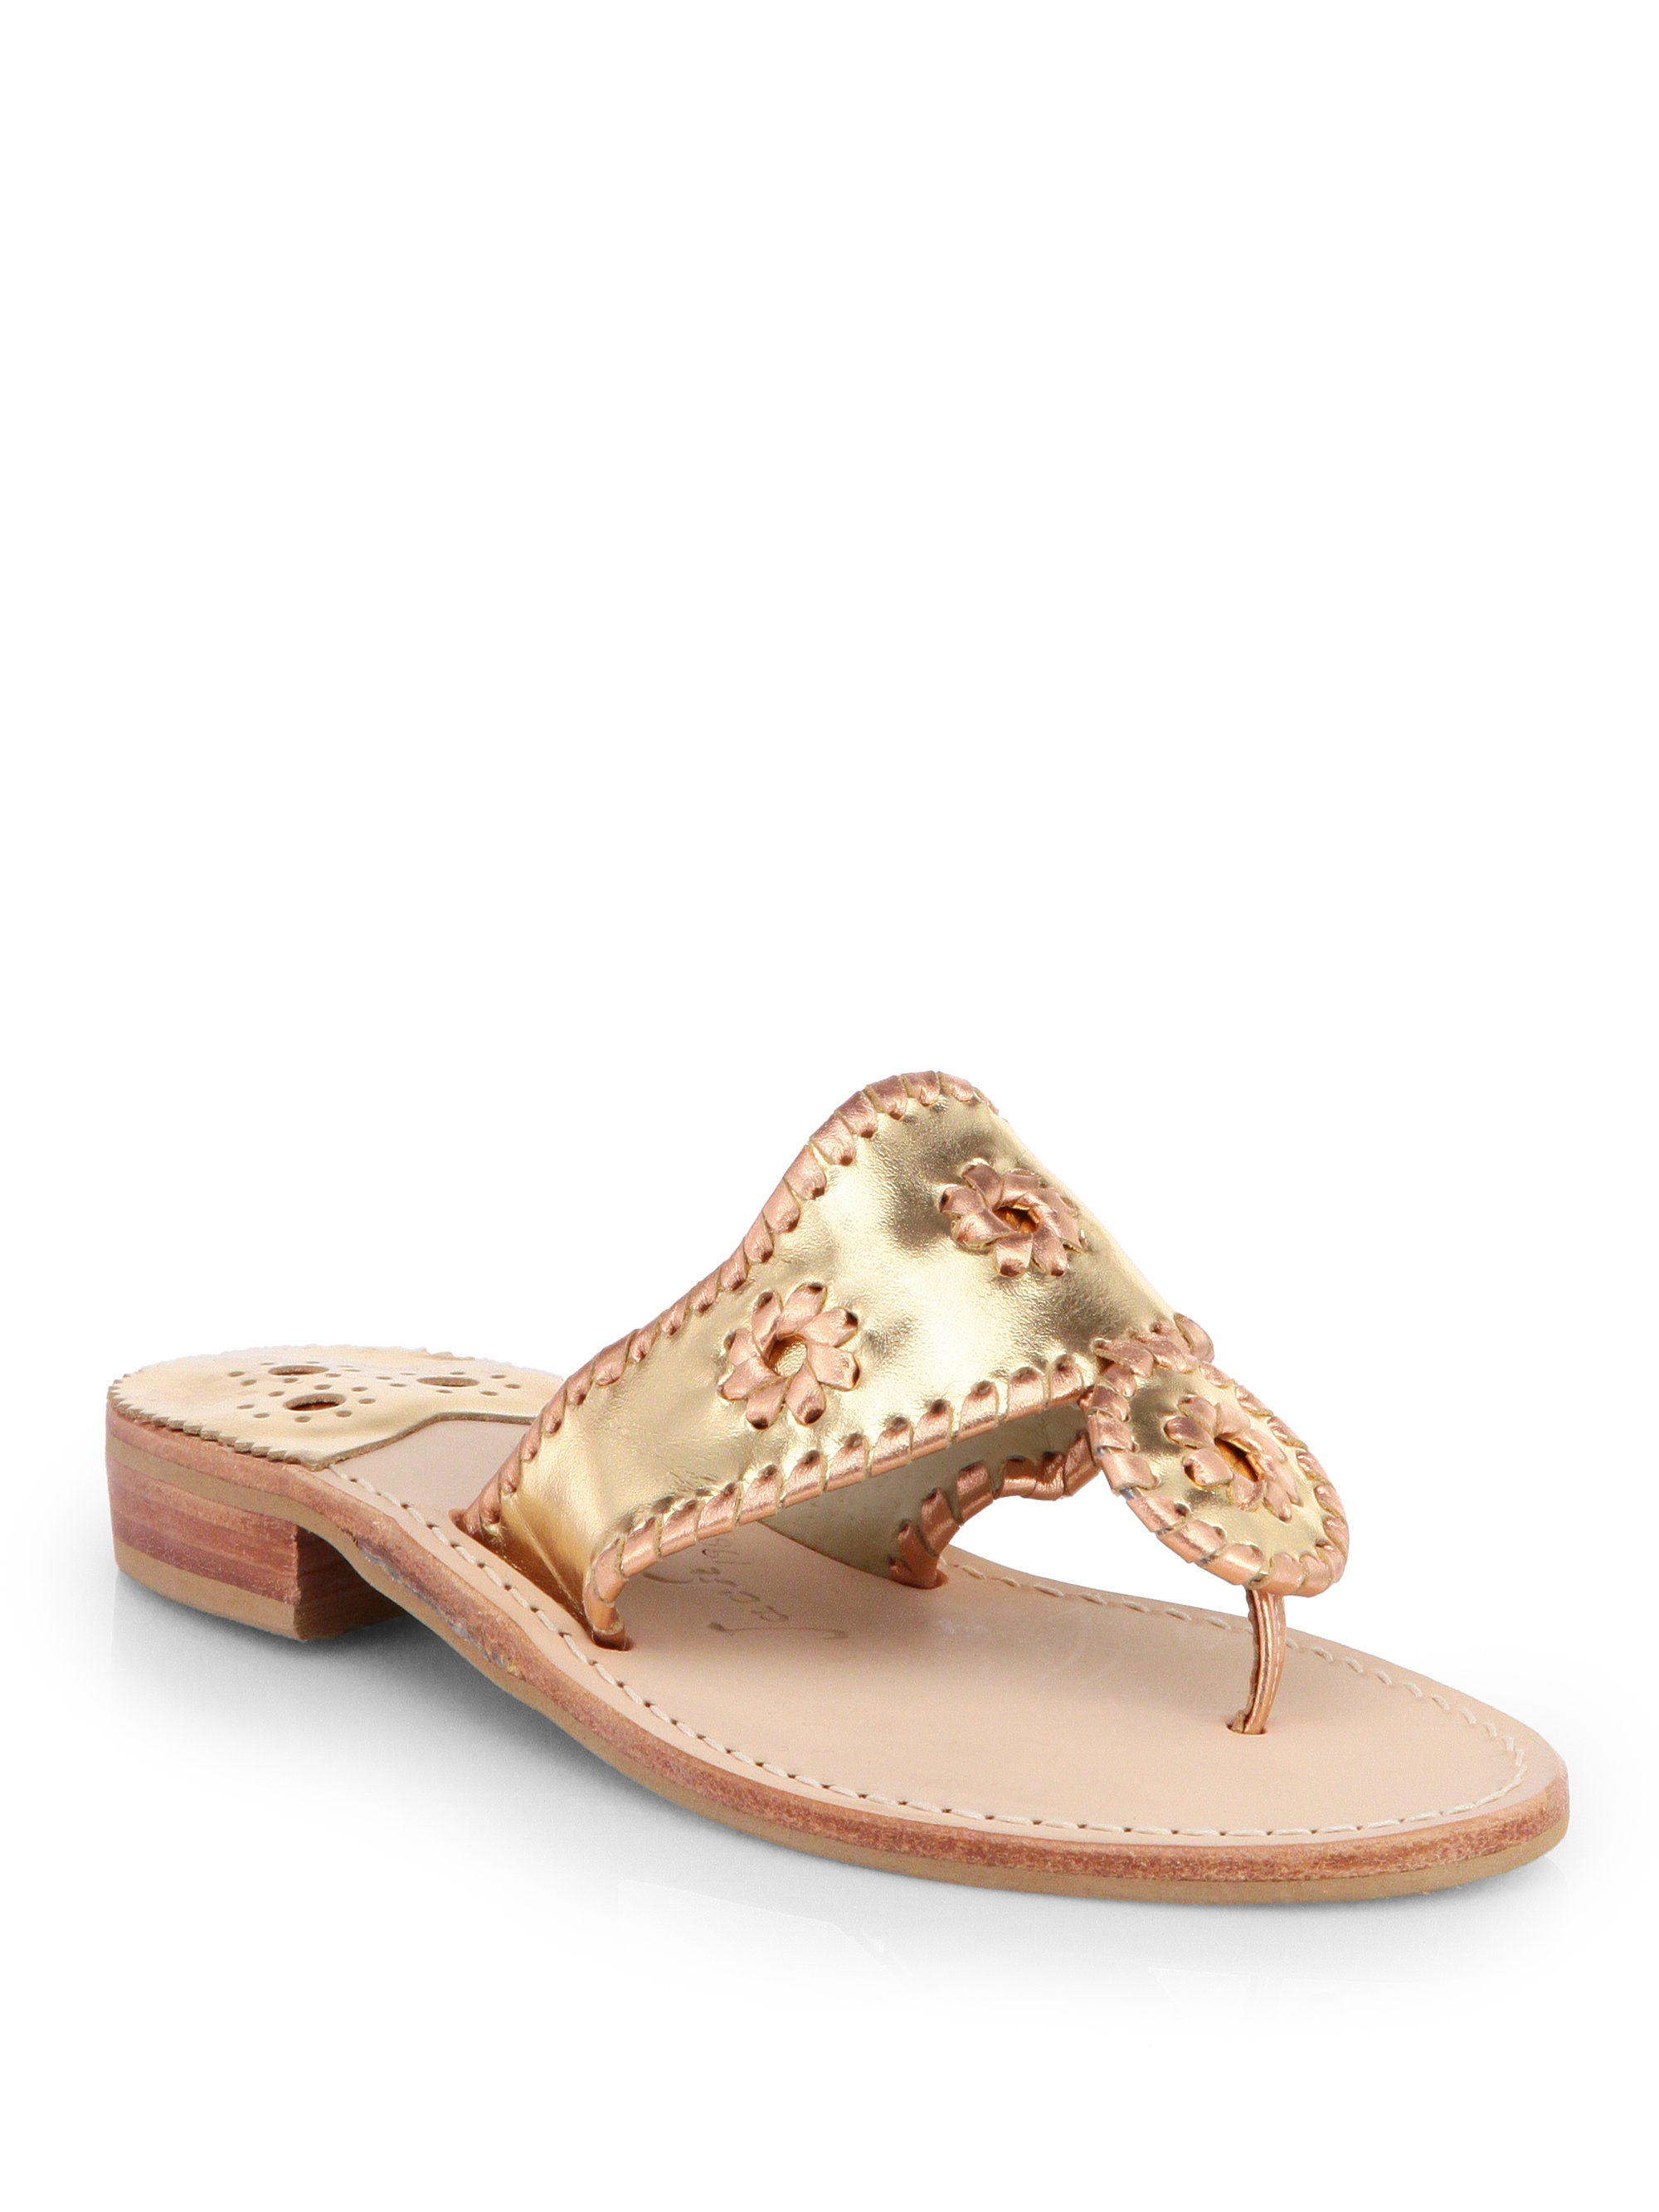 Jack Rogers Nicola Metallic Leather Sandals in Gold (GOLD-ROSEGOLD) | Lyst